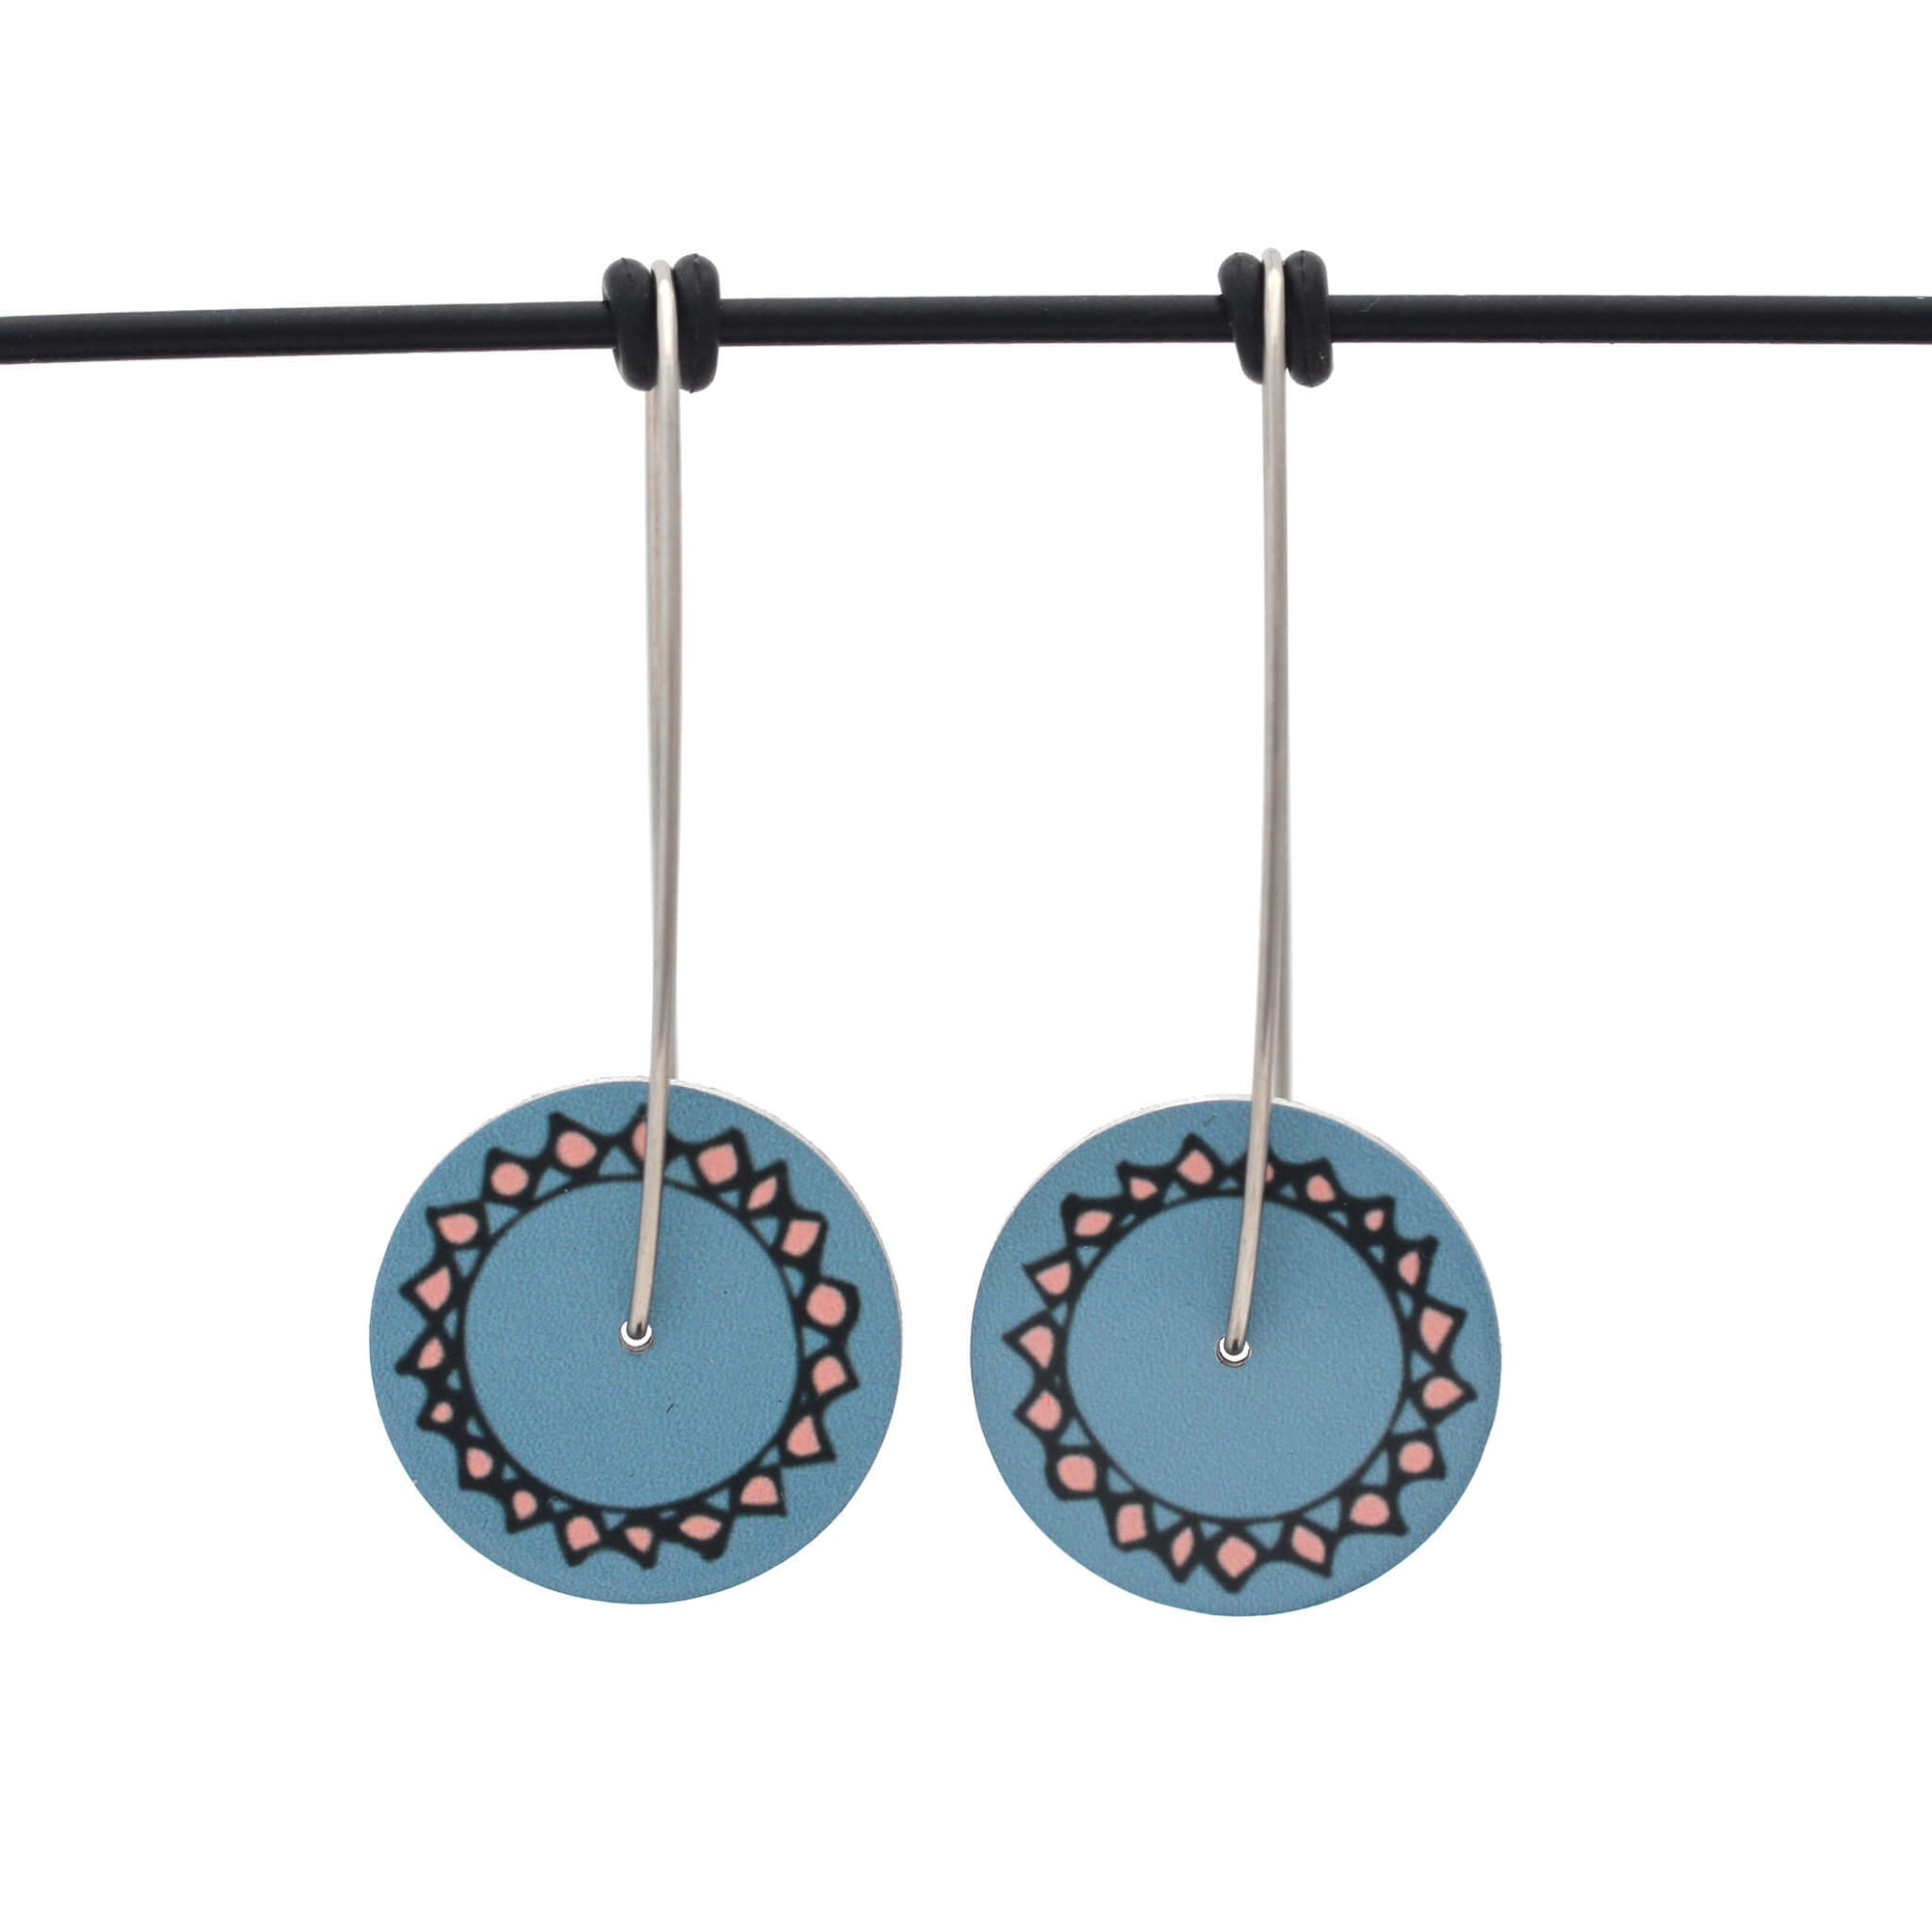 Facets - Vintage button sketch - small circle drop hook earrings